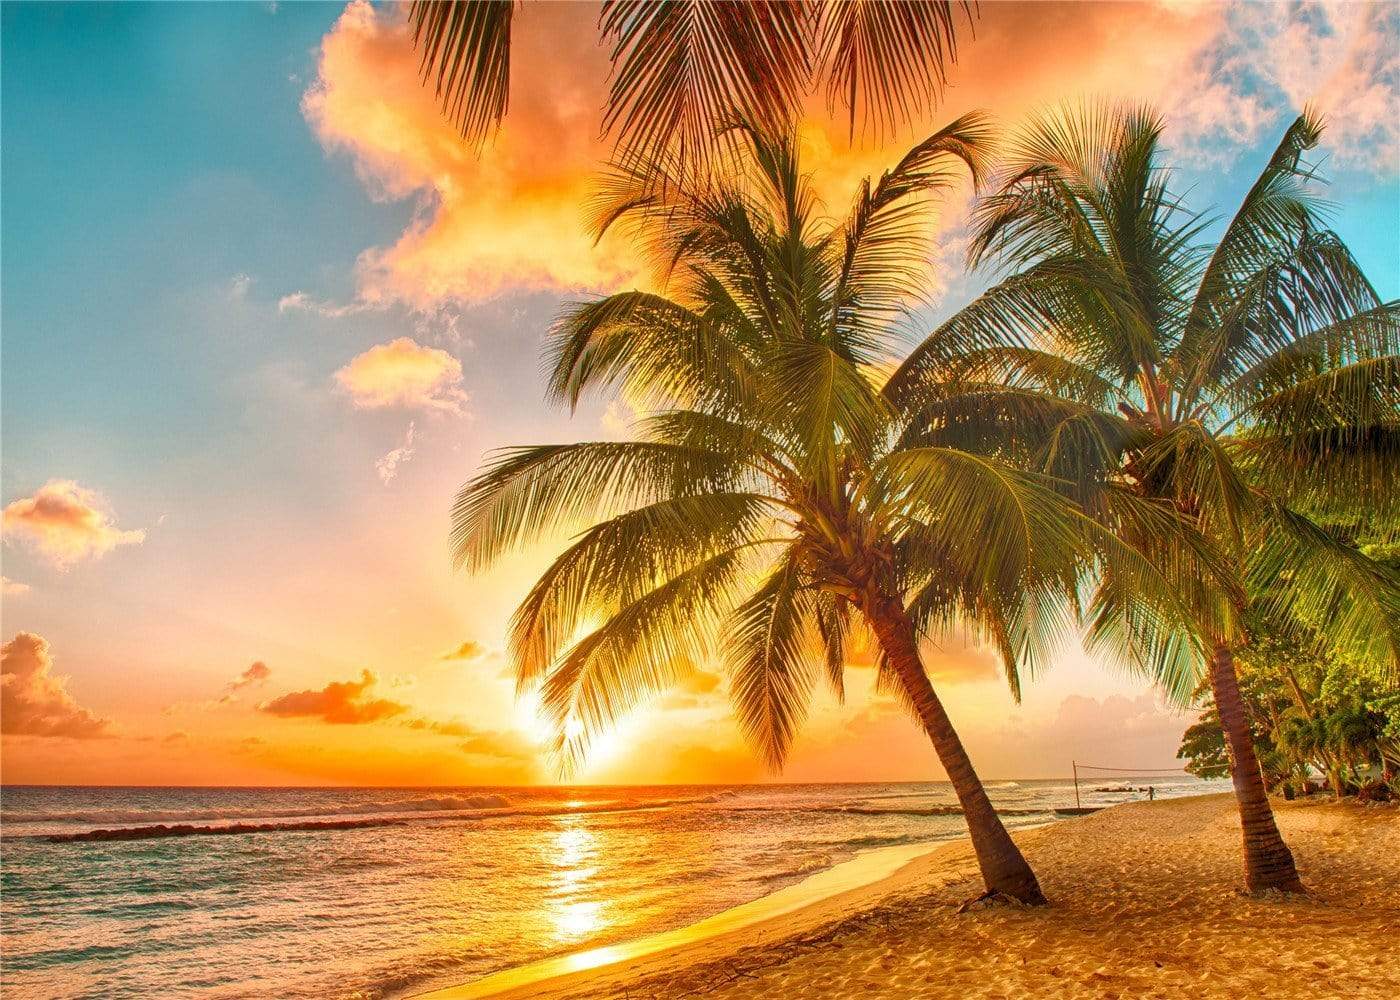 Kate Summer Holiday Coconut trees with Sunset Backdrop